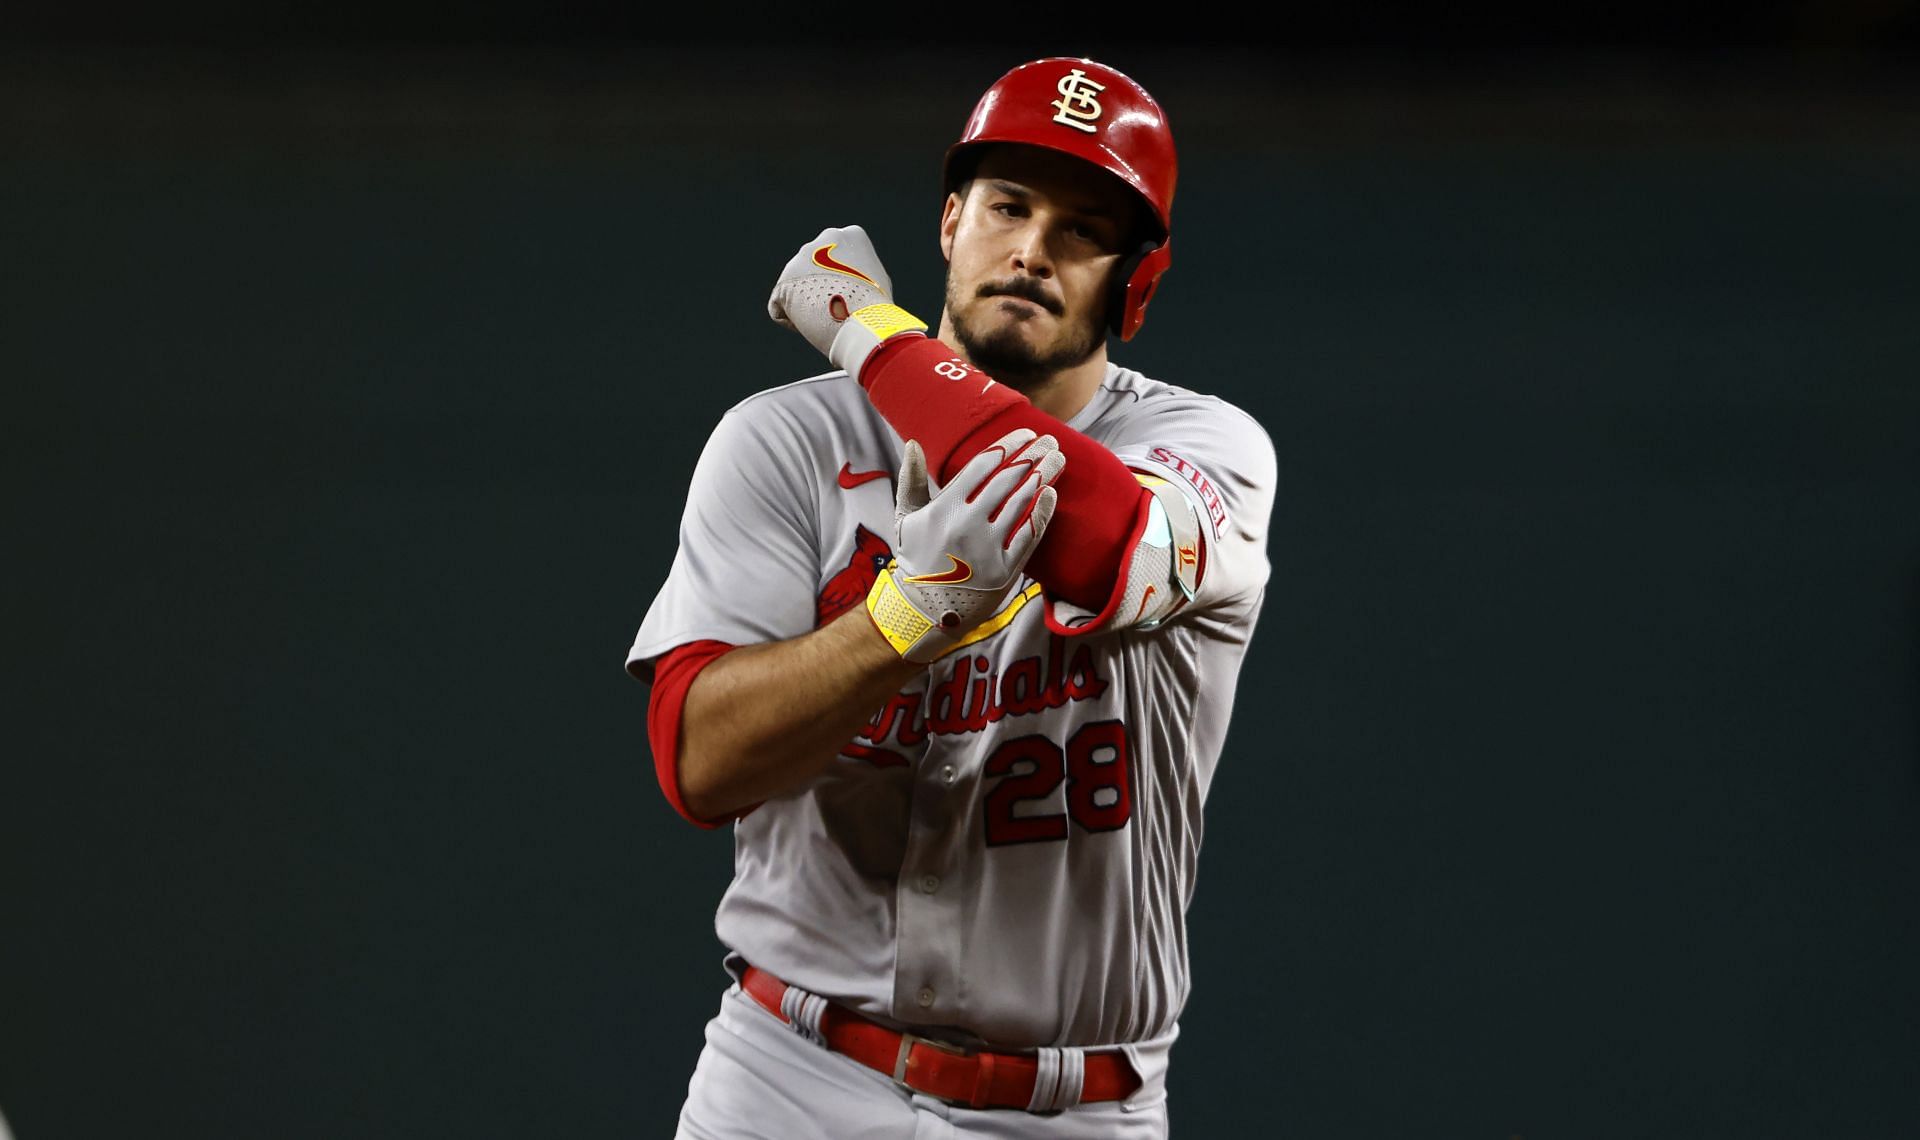 Nolan Arenado admitted the St. Louis Cardinals are bad